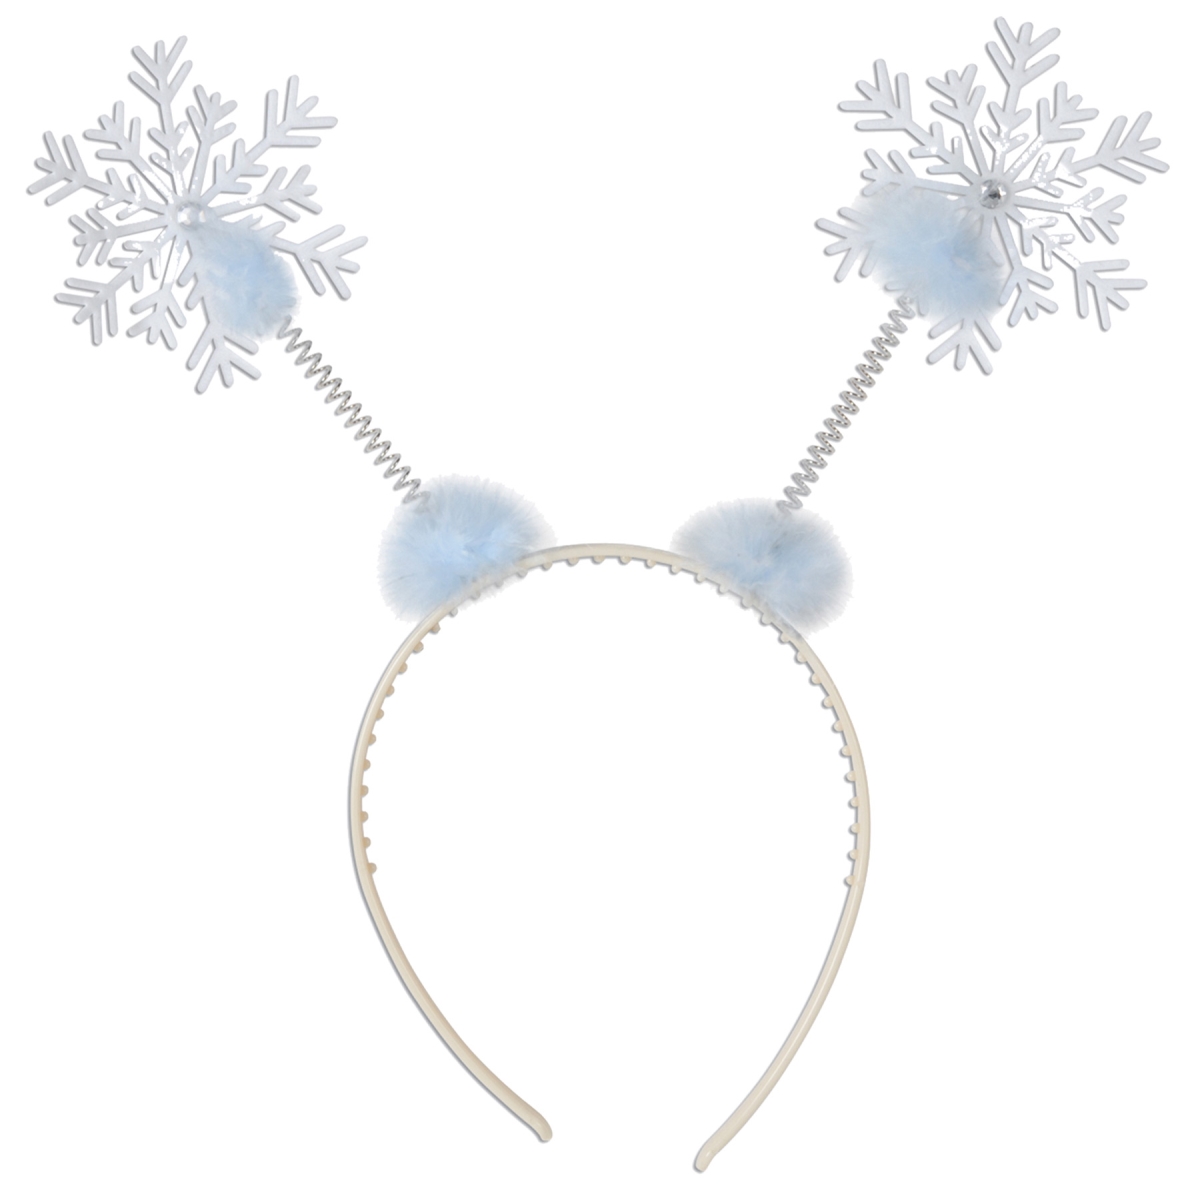 Picture of Morris Costumes BG20721 Snowflake Boppers Costume